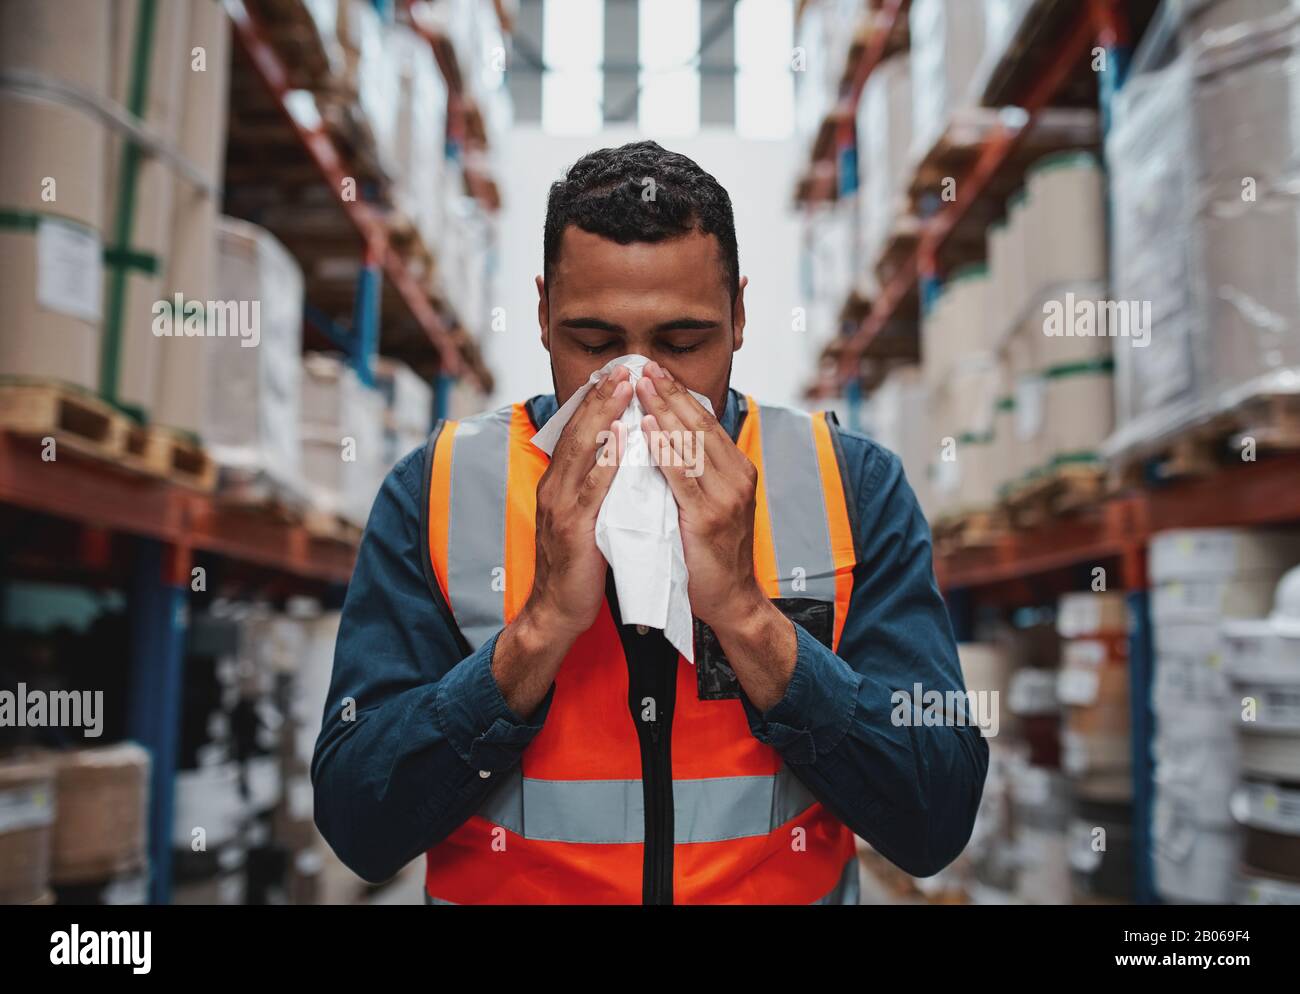 Young sick african warehouse worker blowing nose while working wearing safety vest Stock Photo